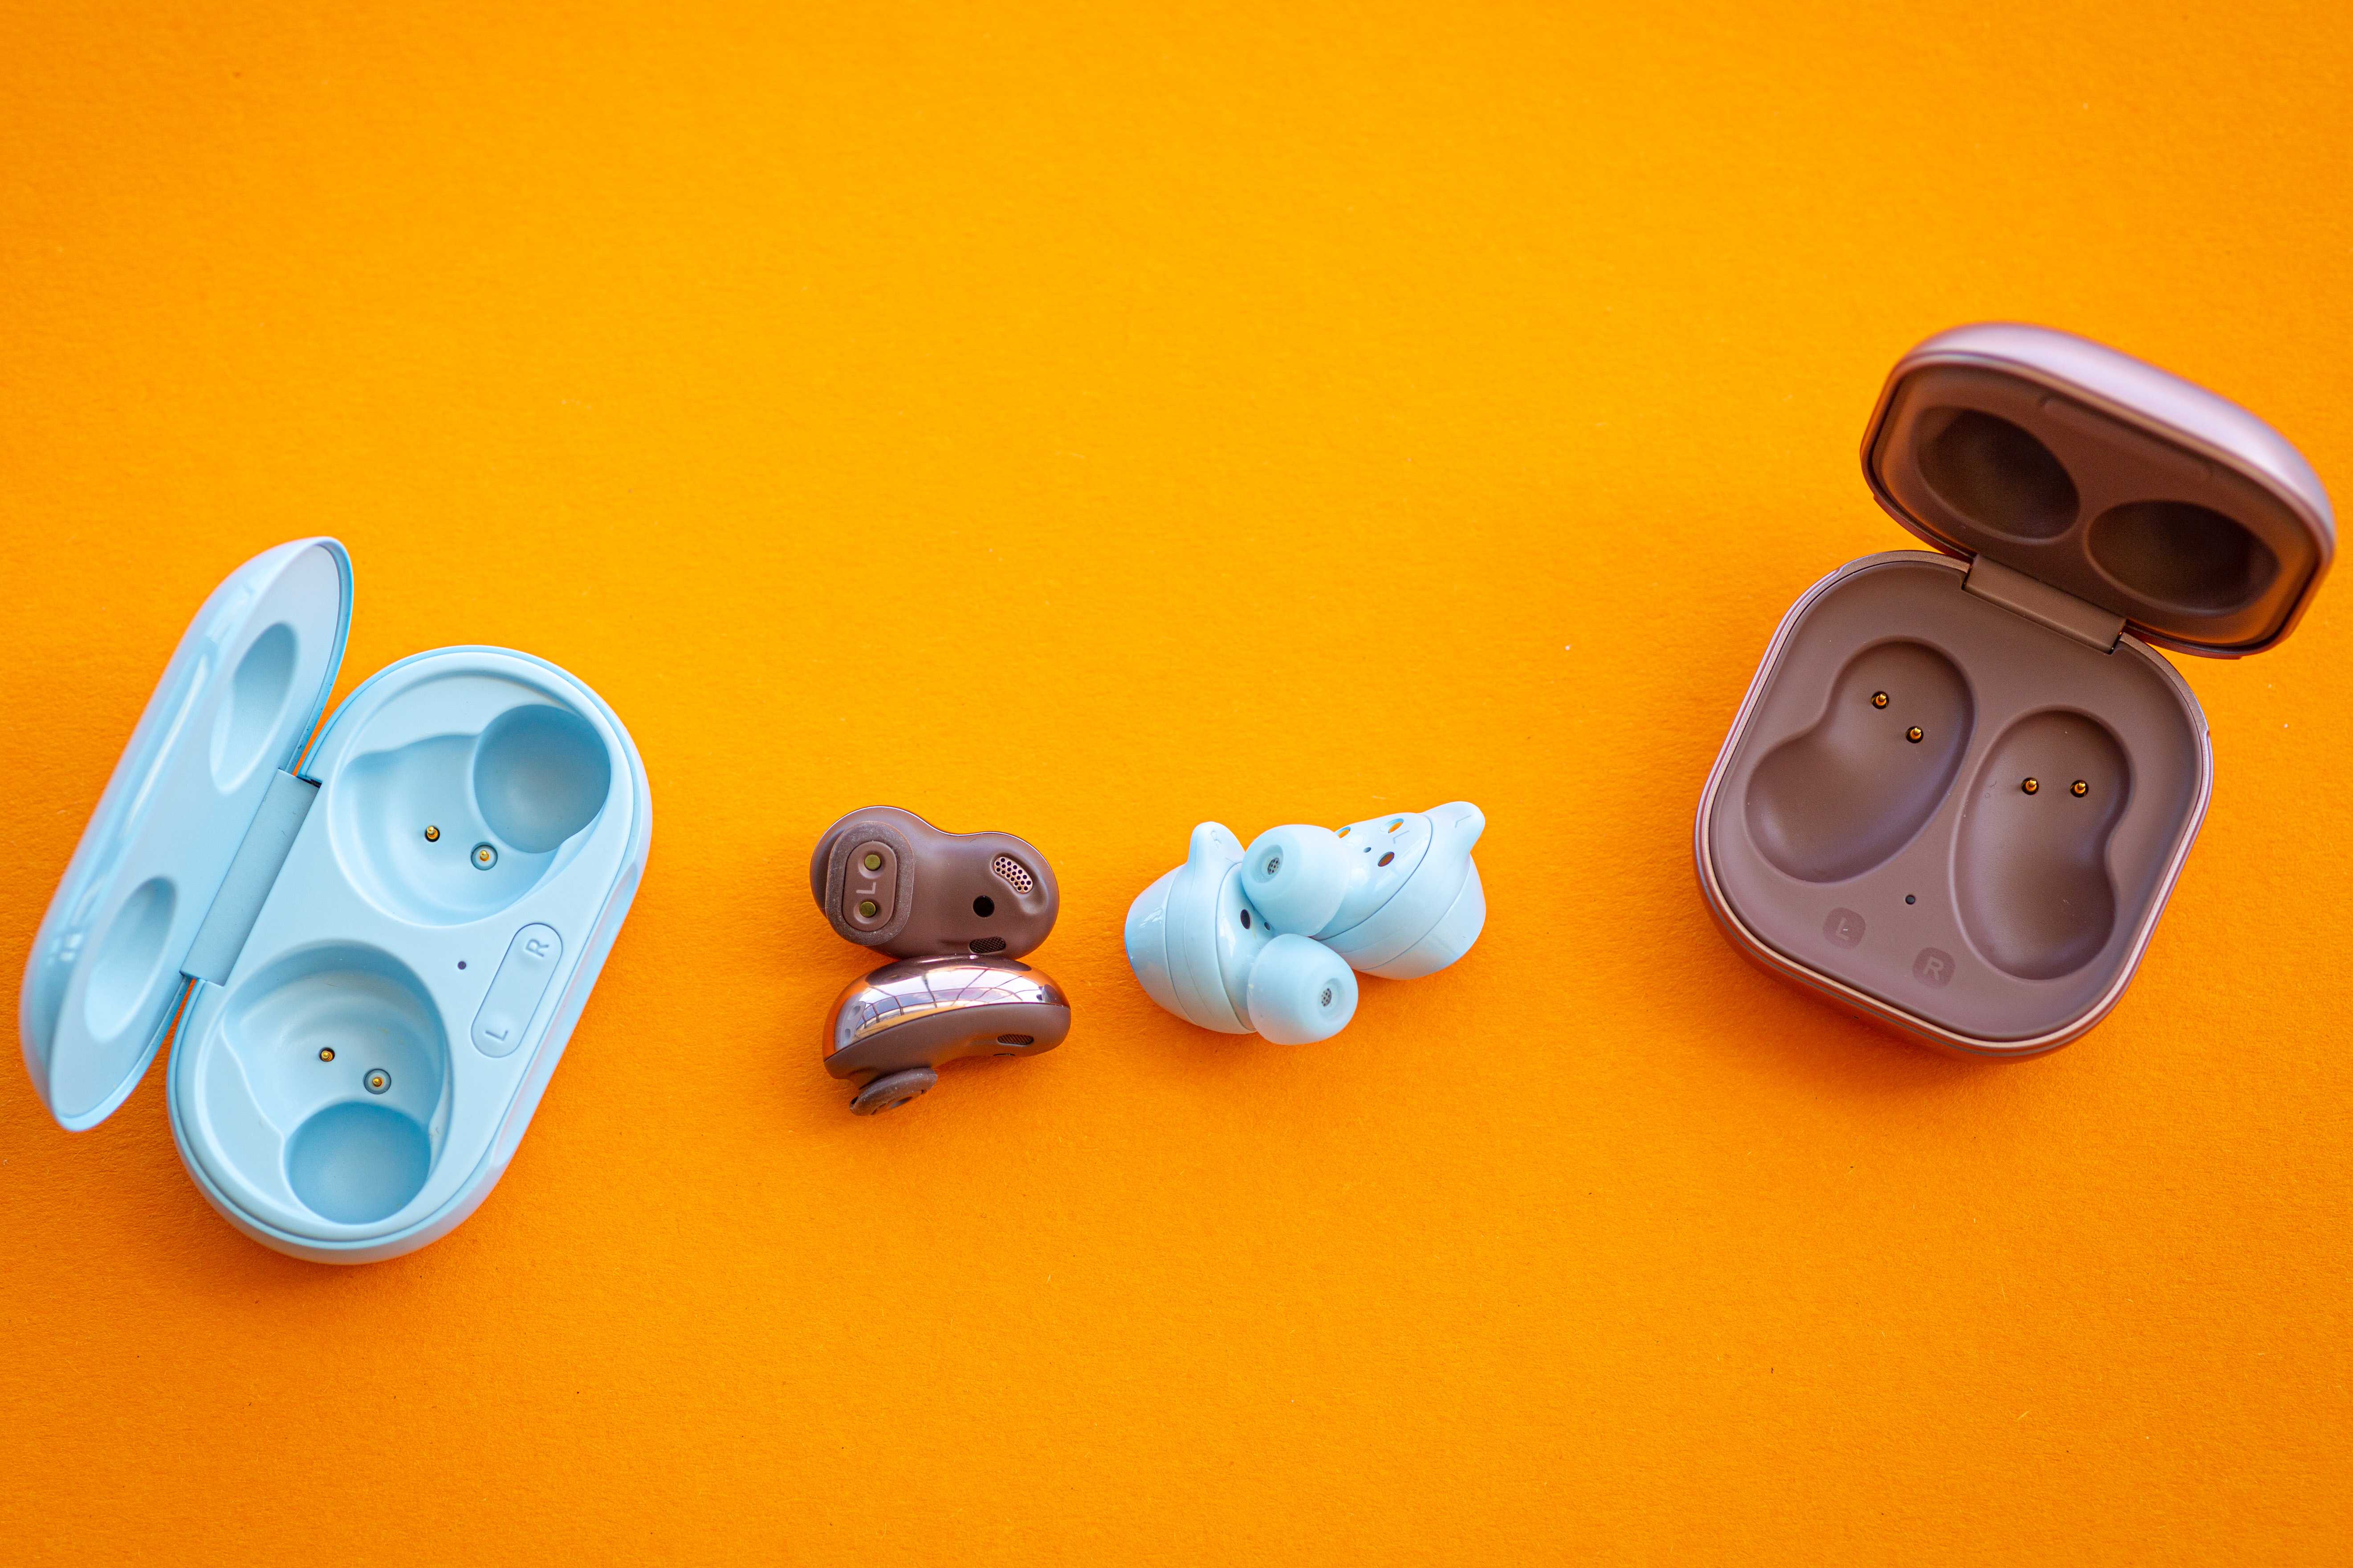 Samsung highlights the key features of Galaxy Buds+ and Galaxy Buds